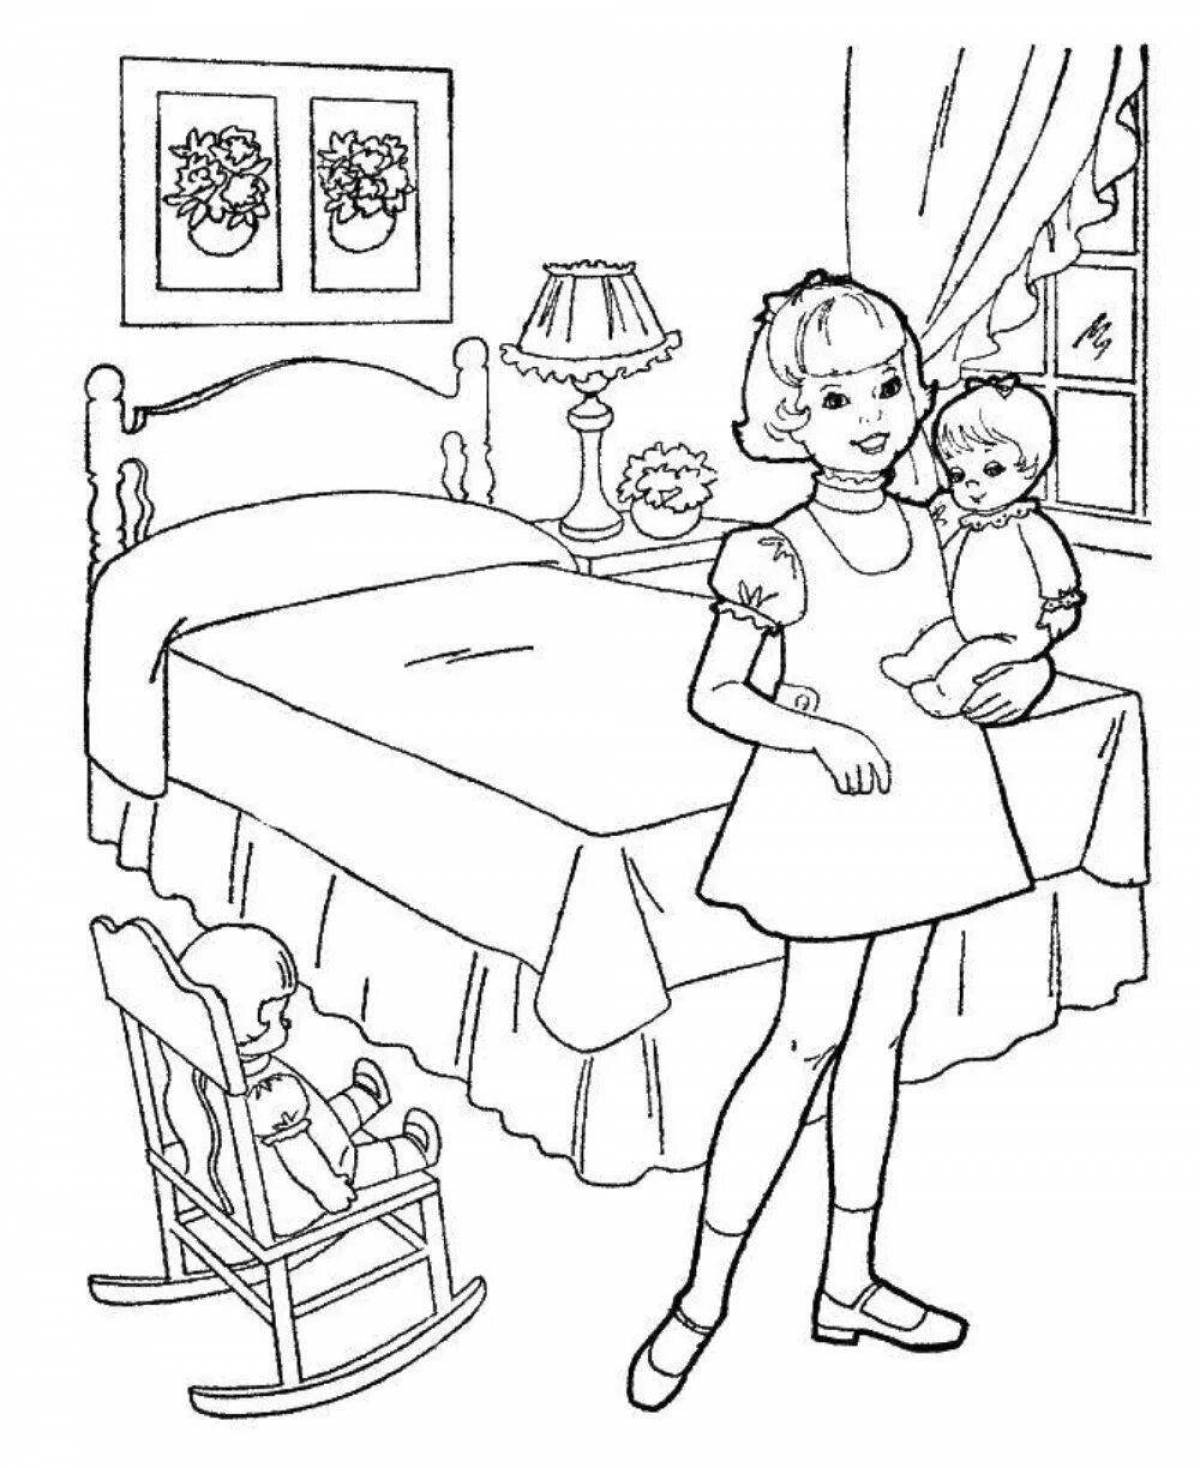 Great girl's room coloring book